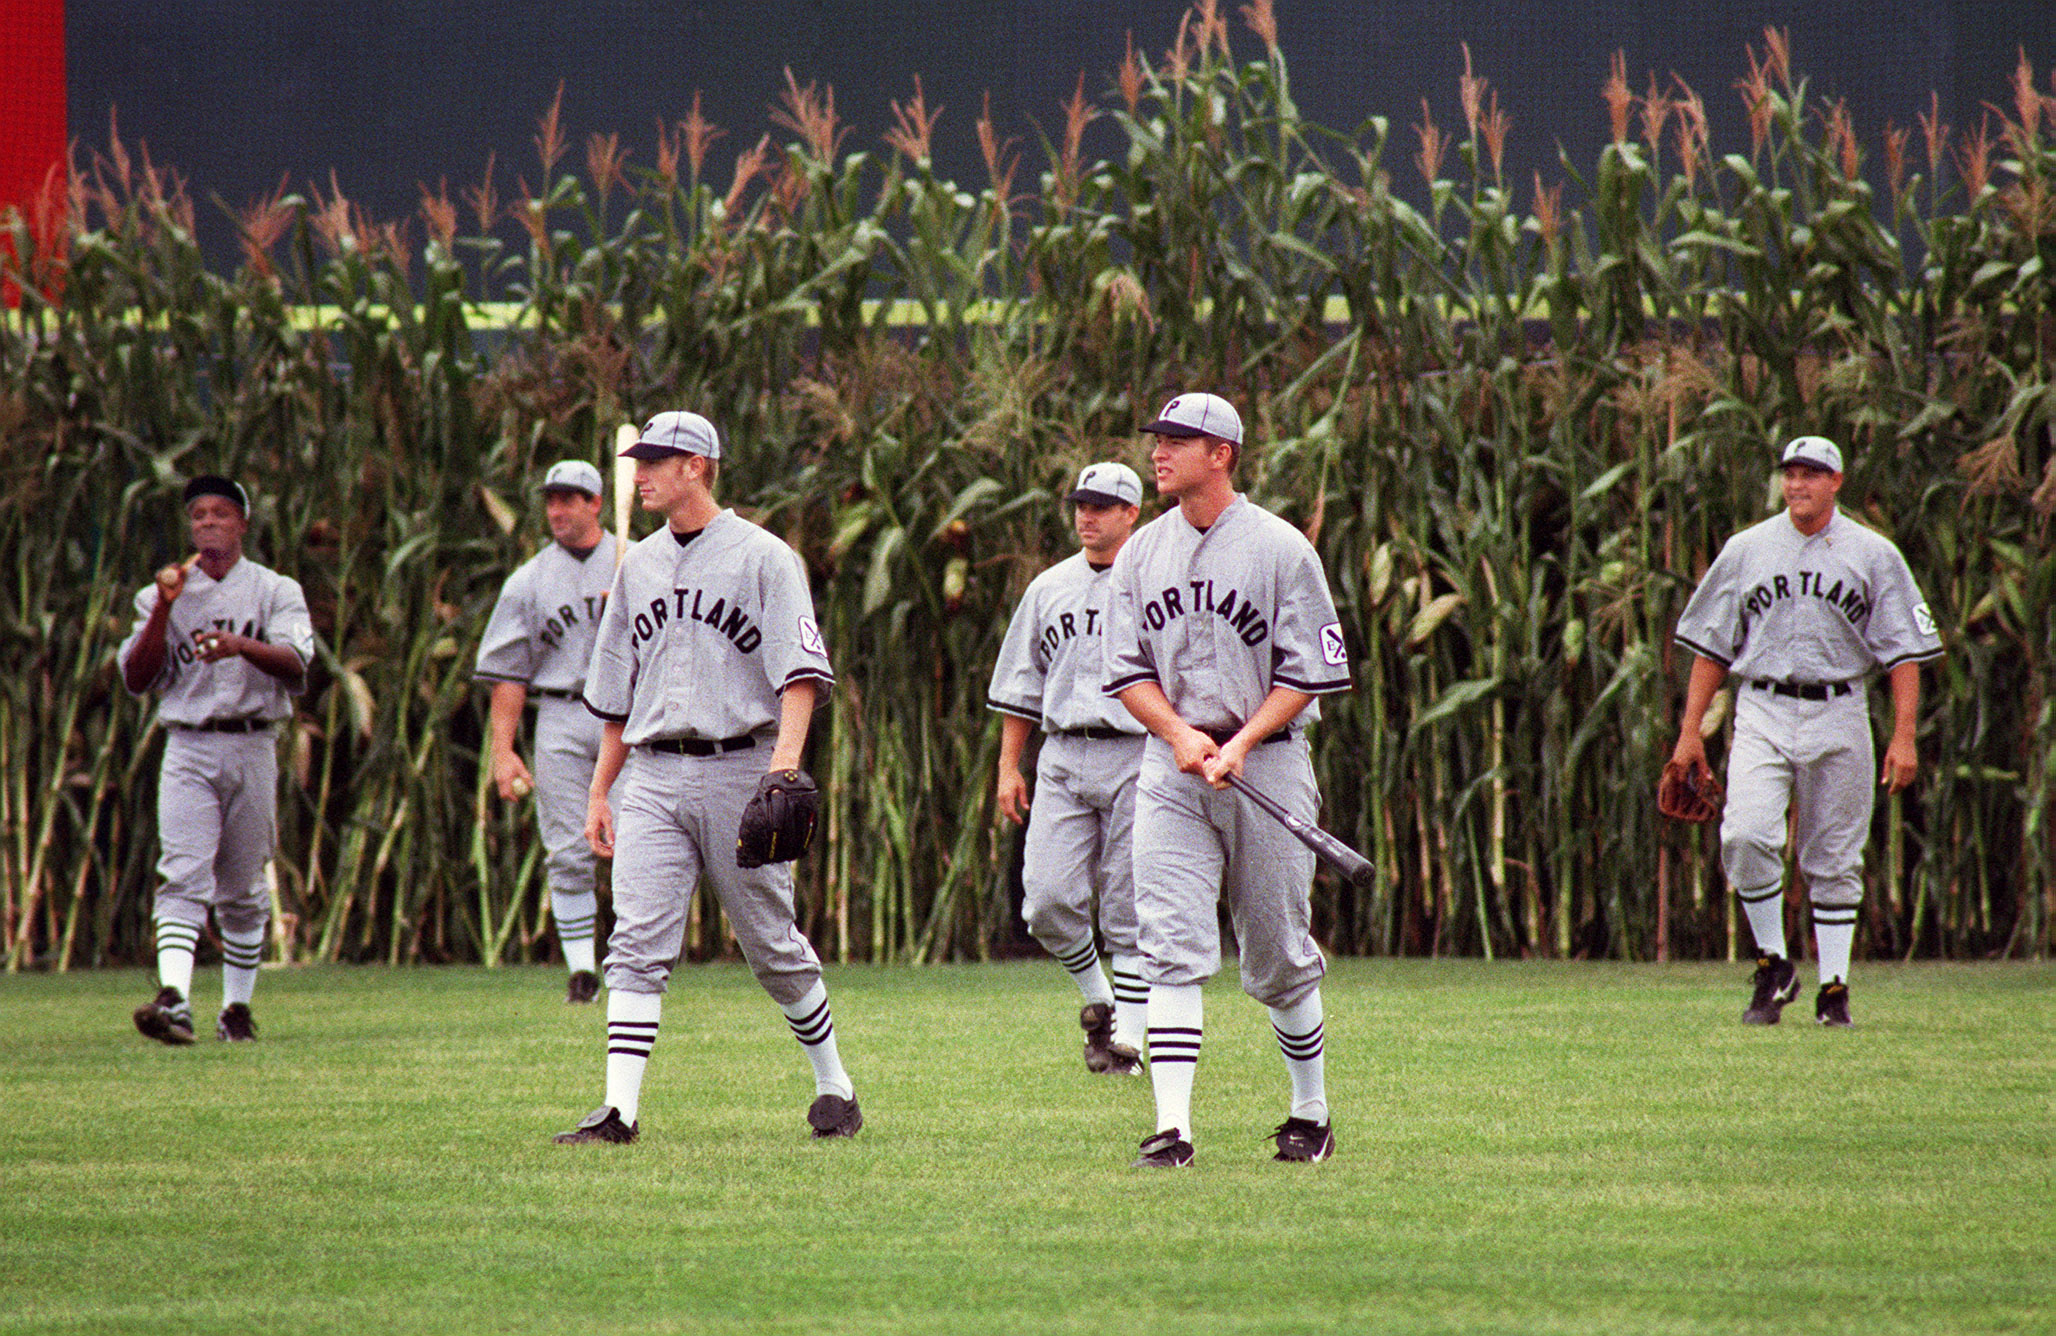 MLB Announces New Plans for Field of Dreams Game - InsideHook